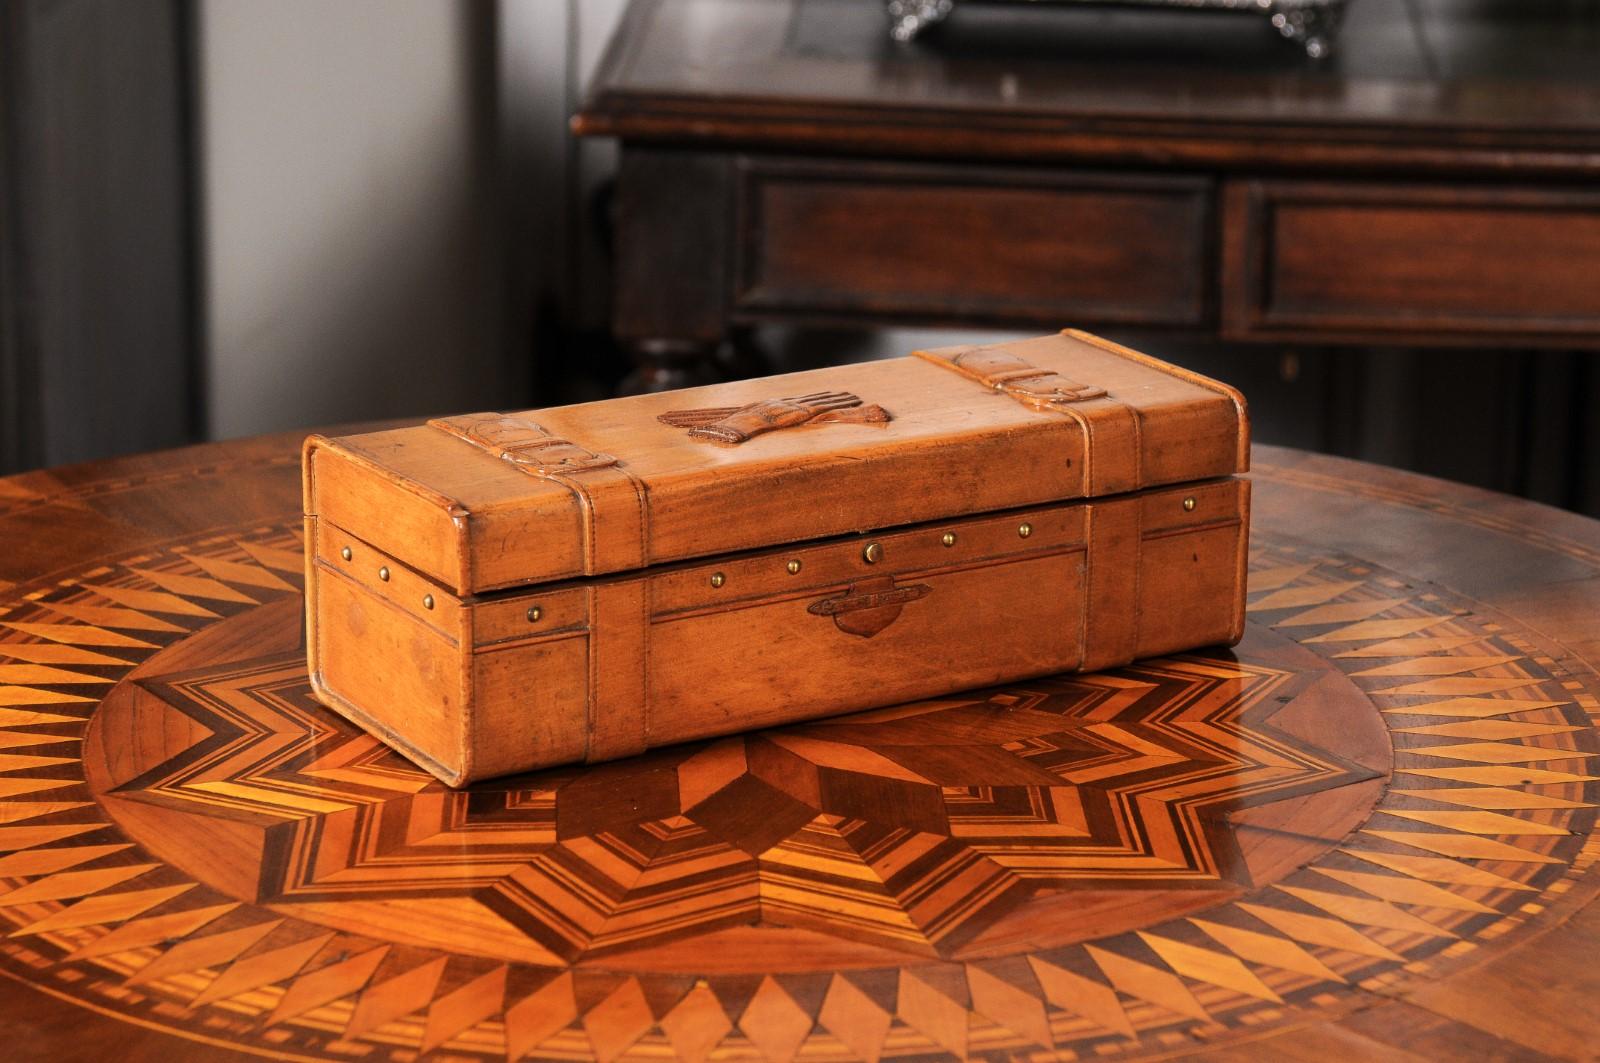 French 19th Century Cherry and Brass Glove Box with Low-Relief Carved Motifs In Good Condition For Sale In Atlanta, GA